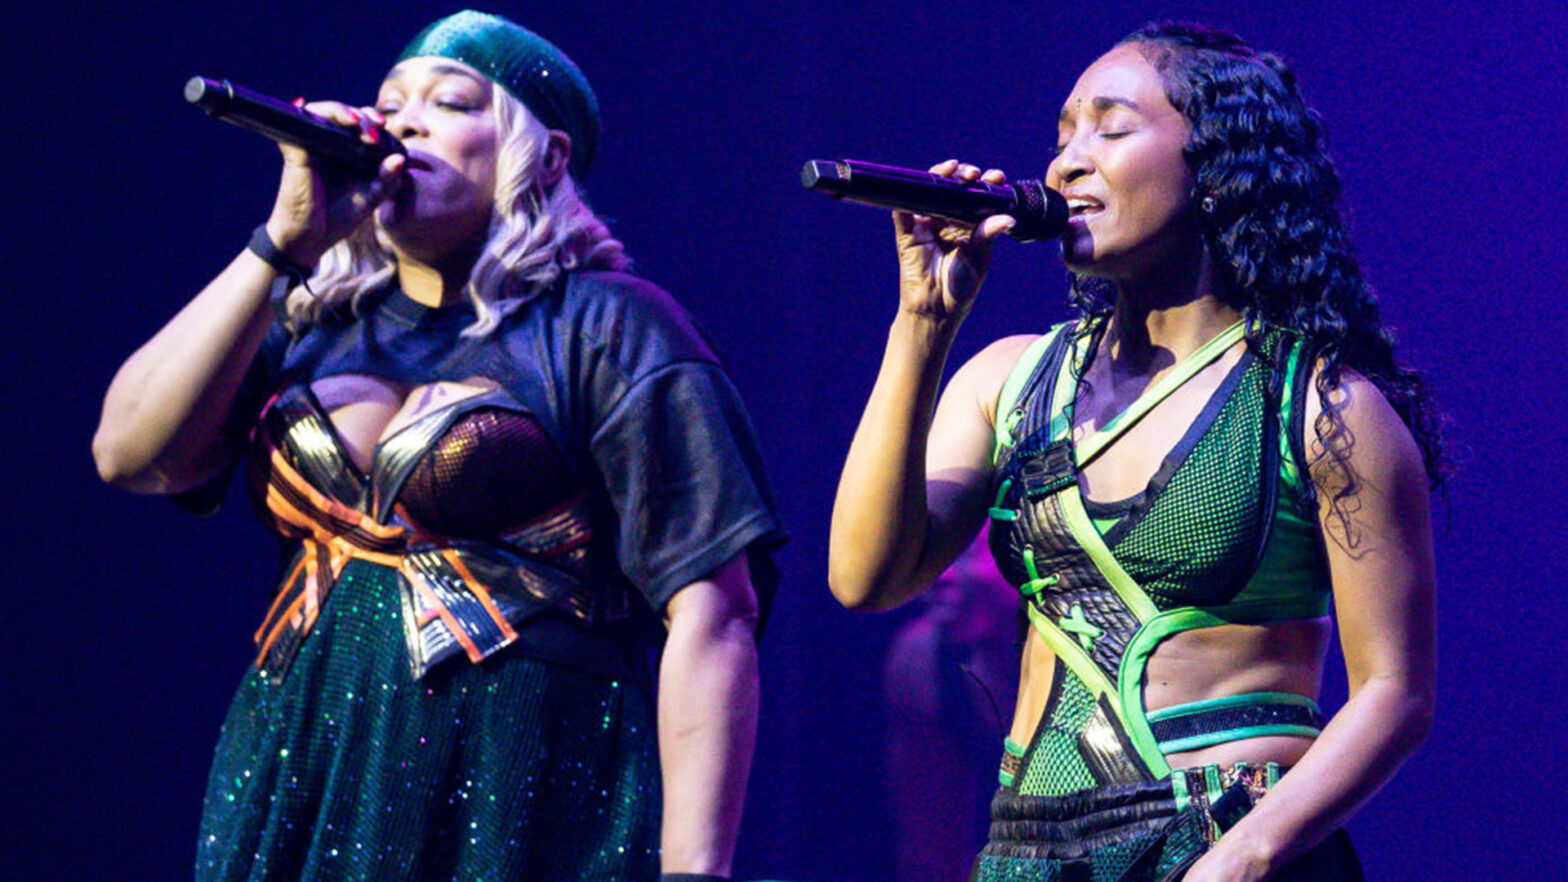 '90s Supergroup TLC Showcases That There's Power In Sisterhood, Having Built A Combined Fortune Of $9.5M